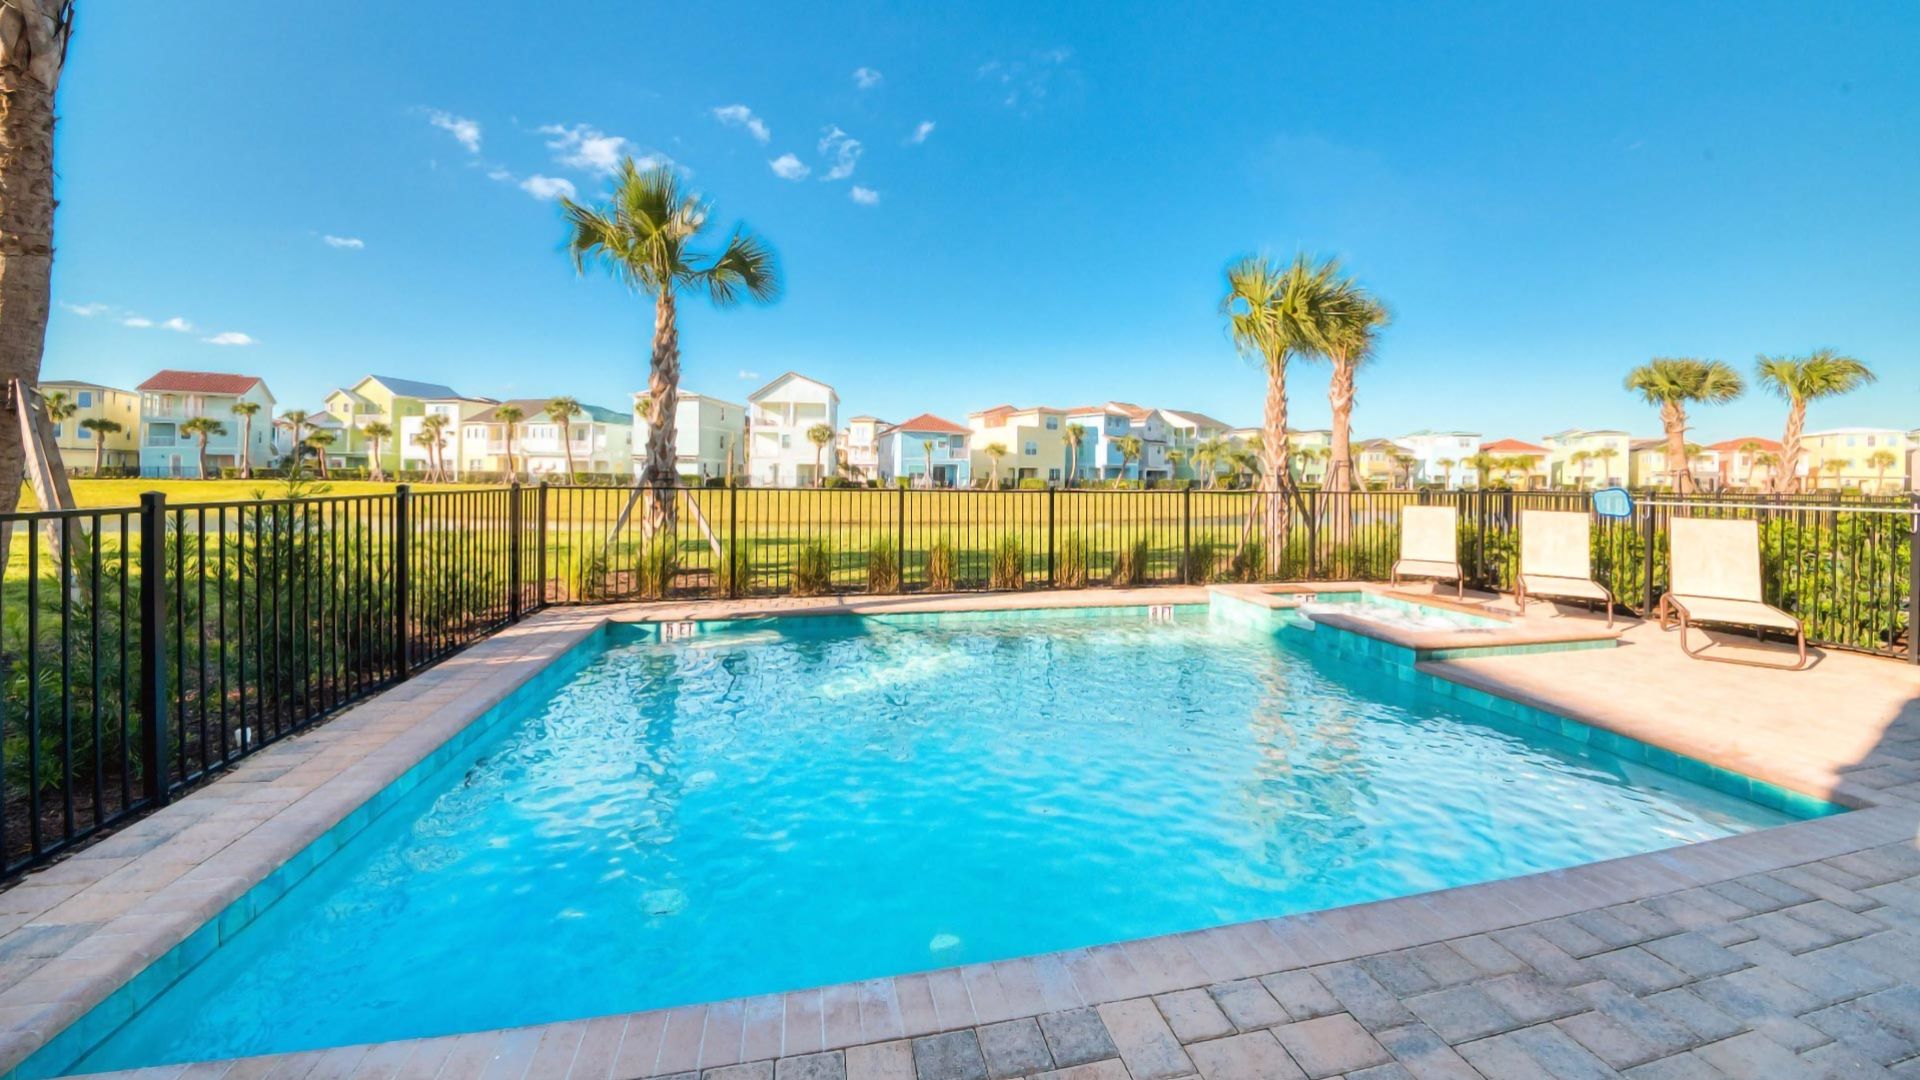 Private Pool And Hot Tub Of A 7-bedroom Cottage With View Of Row Of Margaritaville Resort Orlando Cottages.